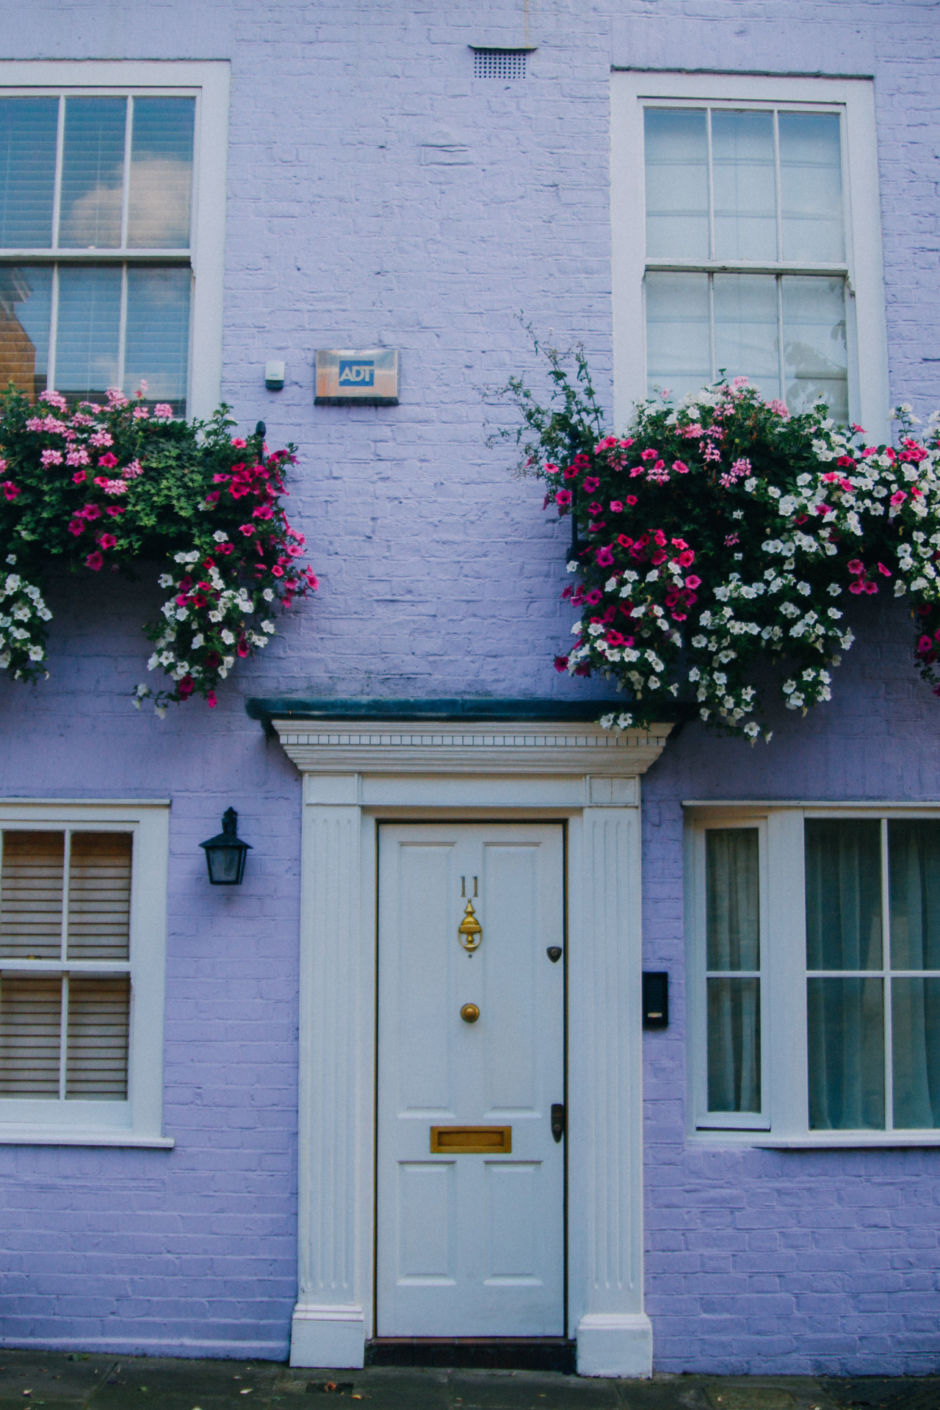 11 Images That Prove London Is One of the Most Colorful Places on Earth